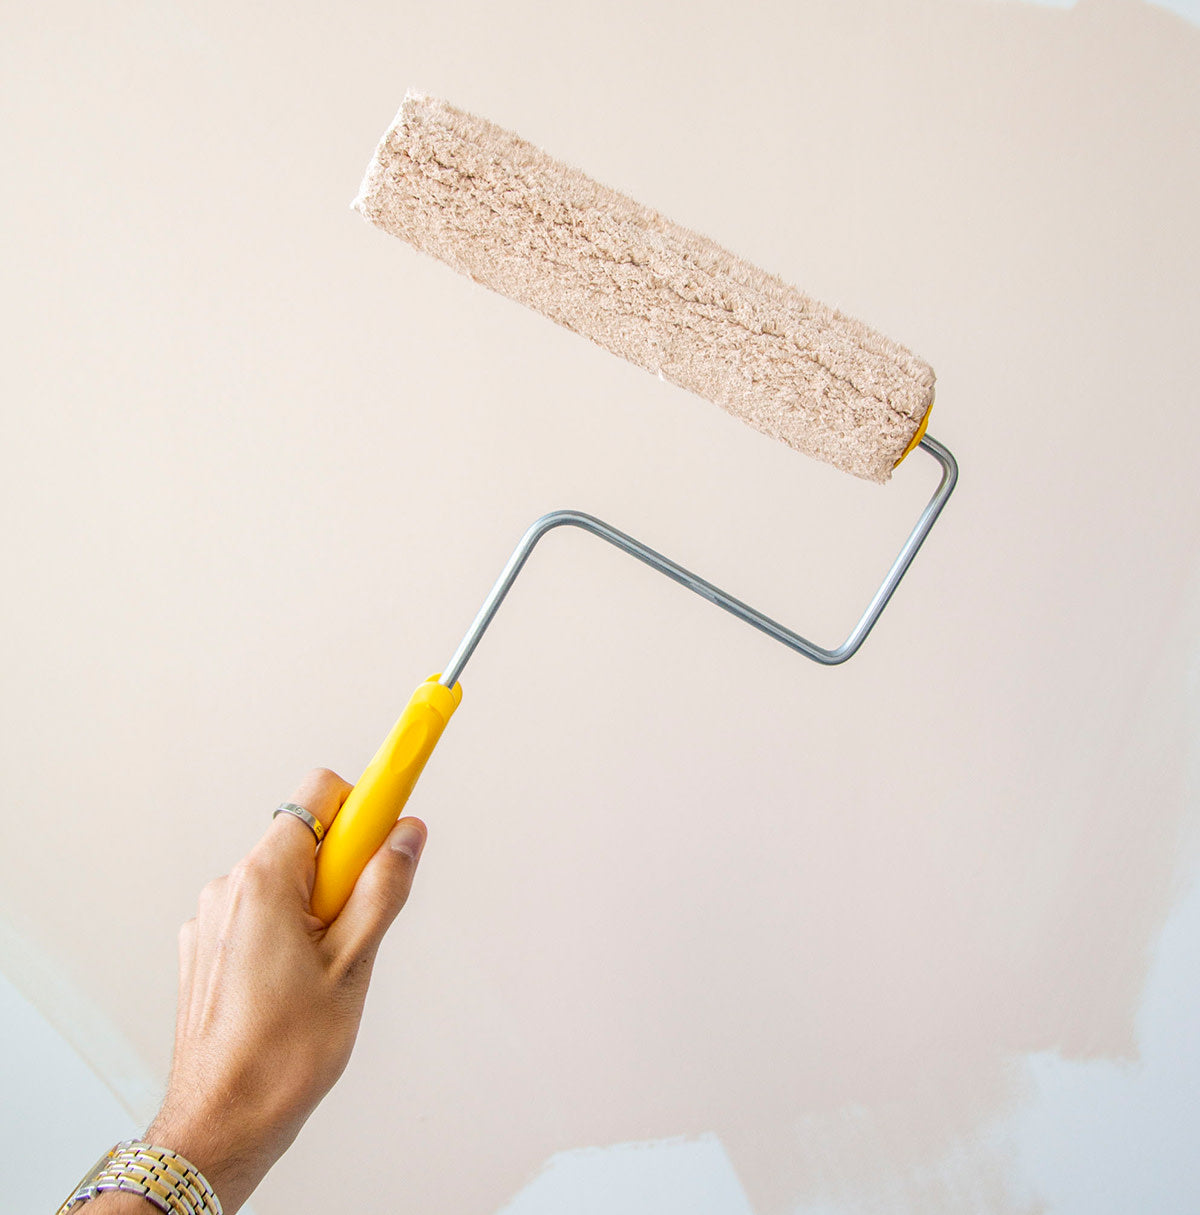 Here's your ultimate guide to ordering paint online! Learn what to expect, how to choose the perfect hue, how much paint to buy and more.